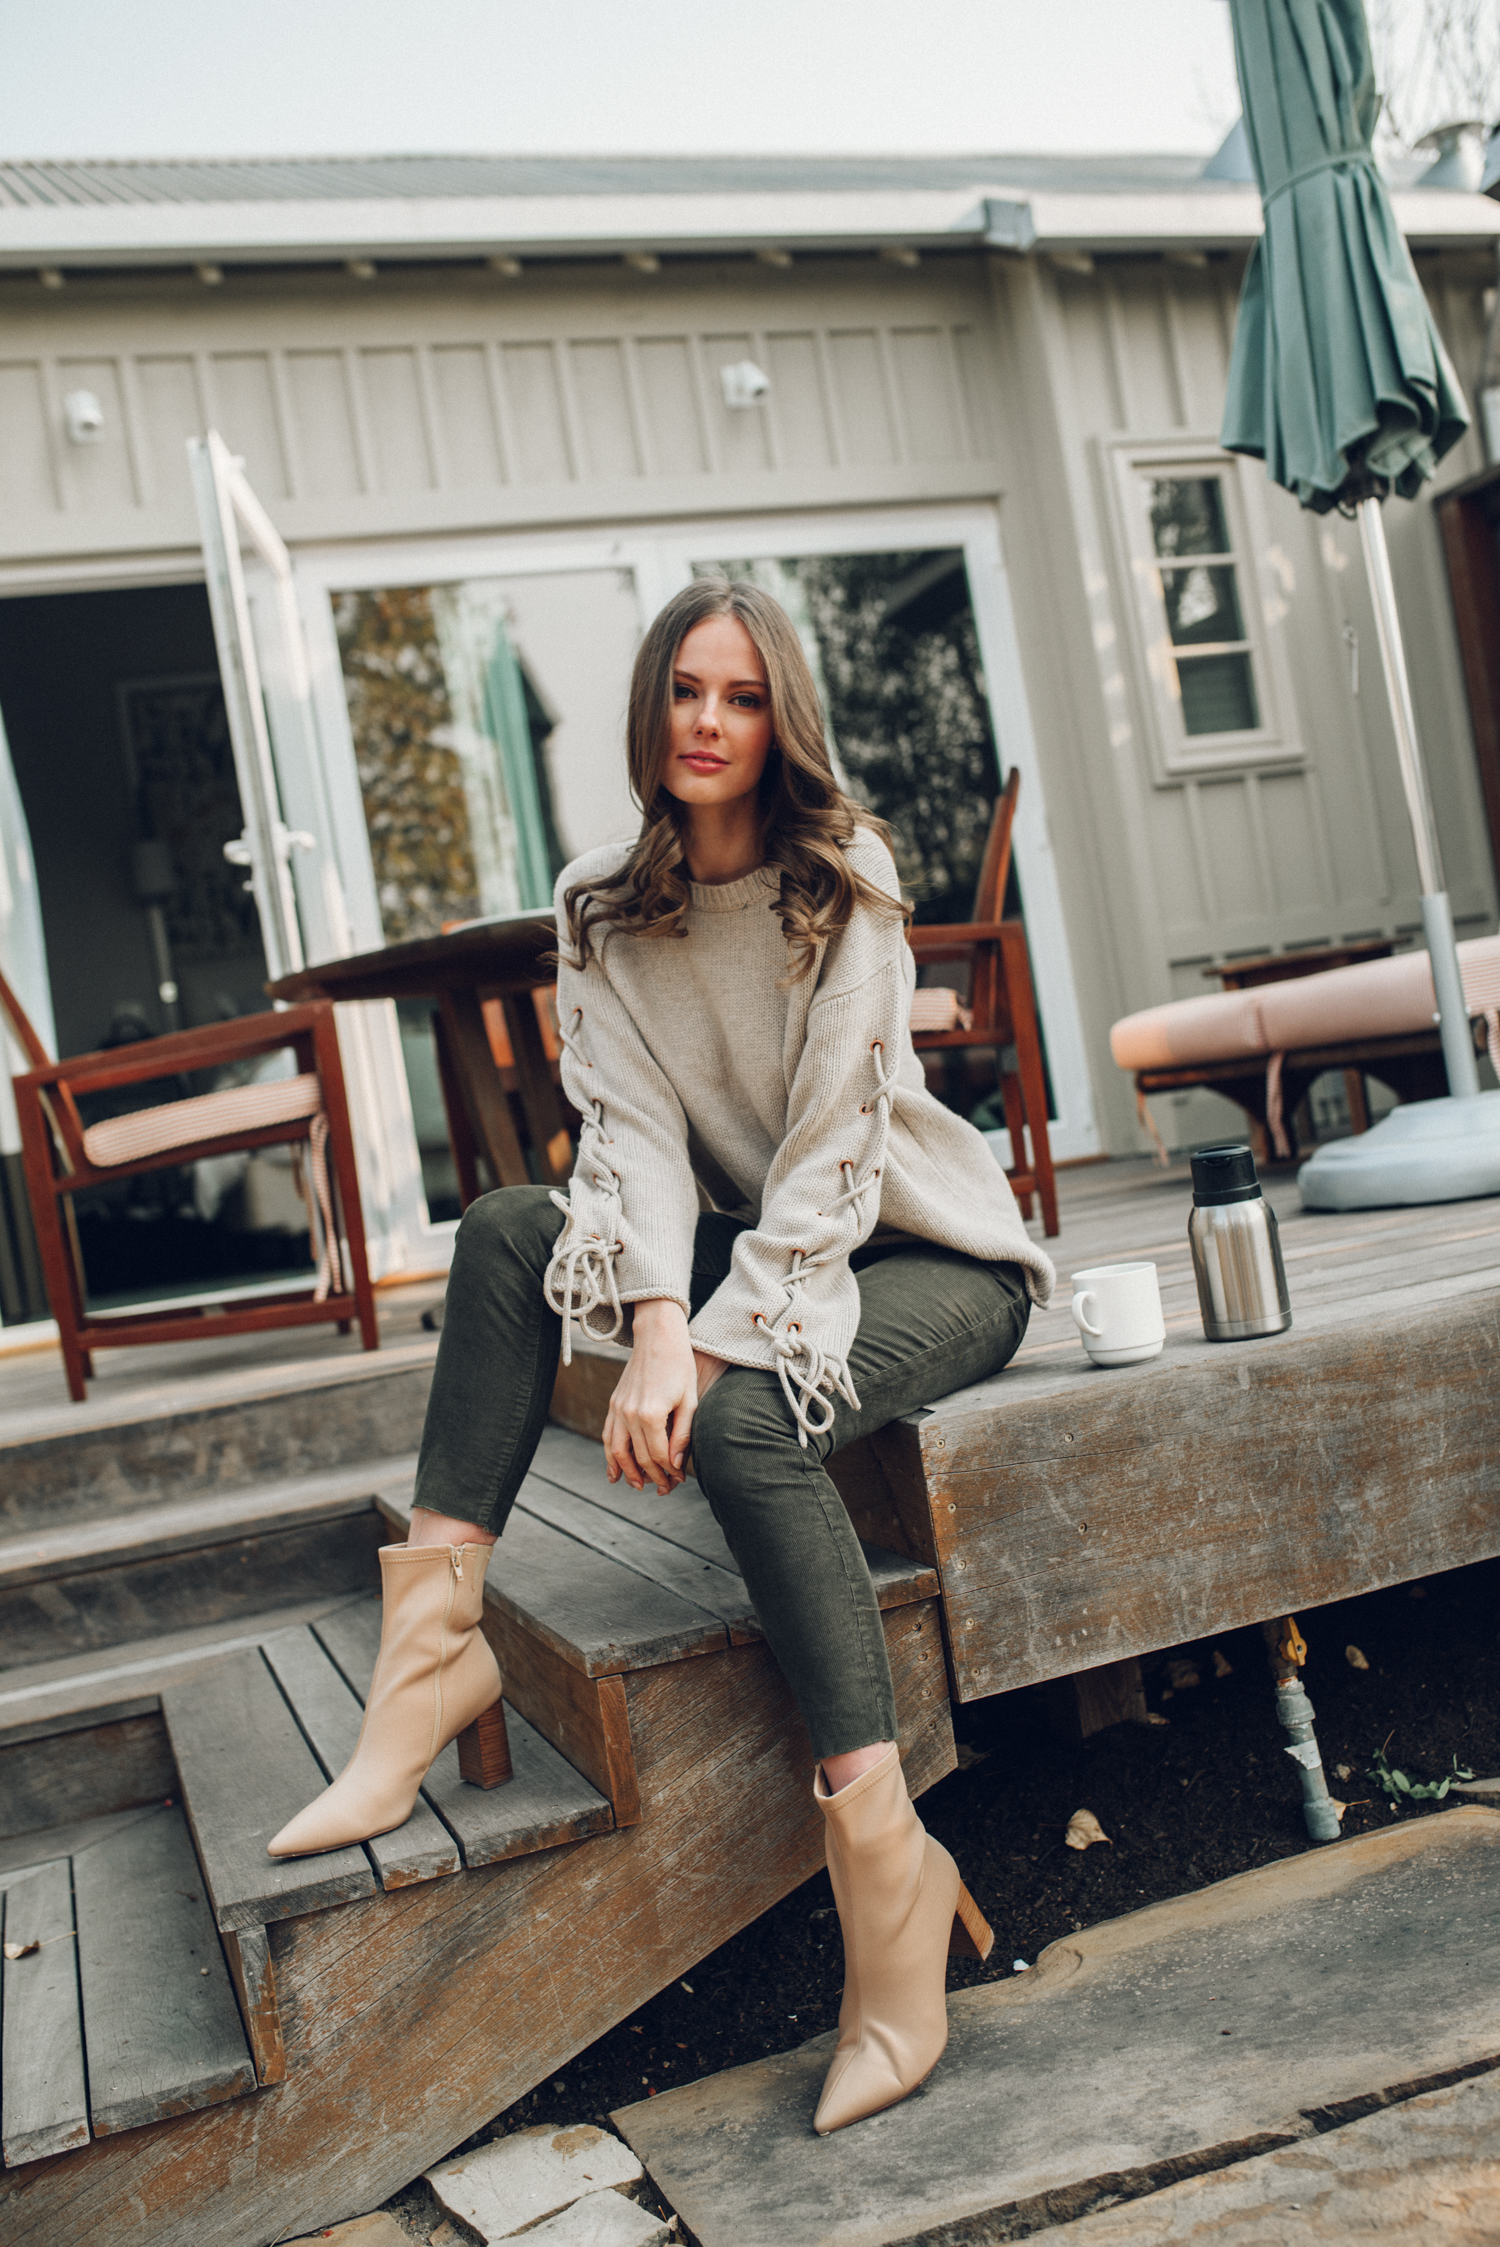 Alyssa Campanella of The A List blog visits Carneros Resort & Spa in November 2018 for cabernet season in a Harvest Cottage wearing See by Chloé lace up sleeve sweater and Jeffrey Campbell siren bootie